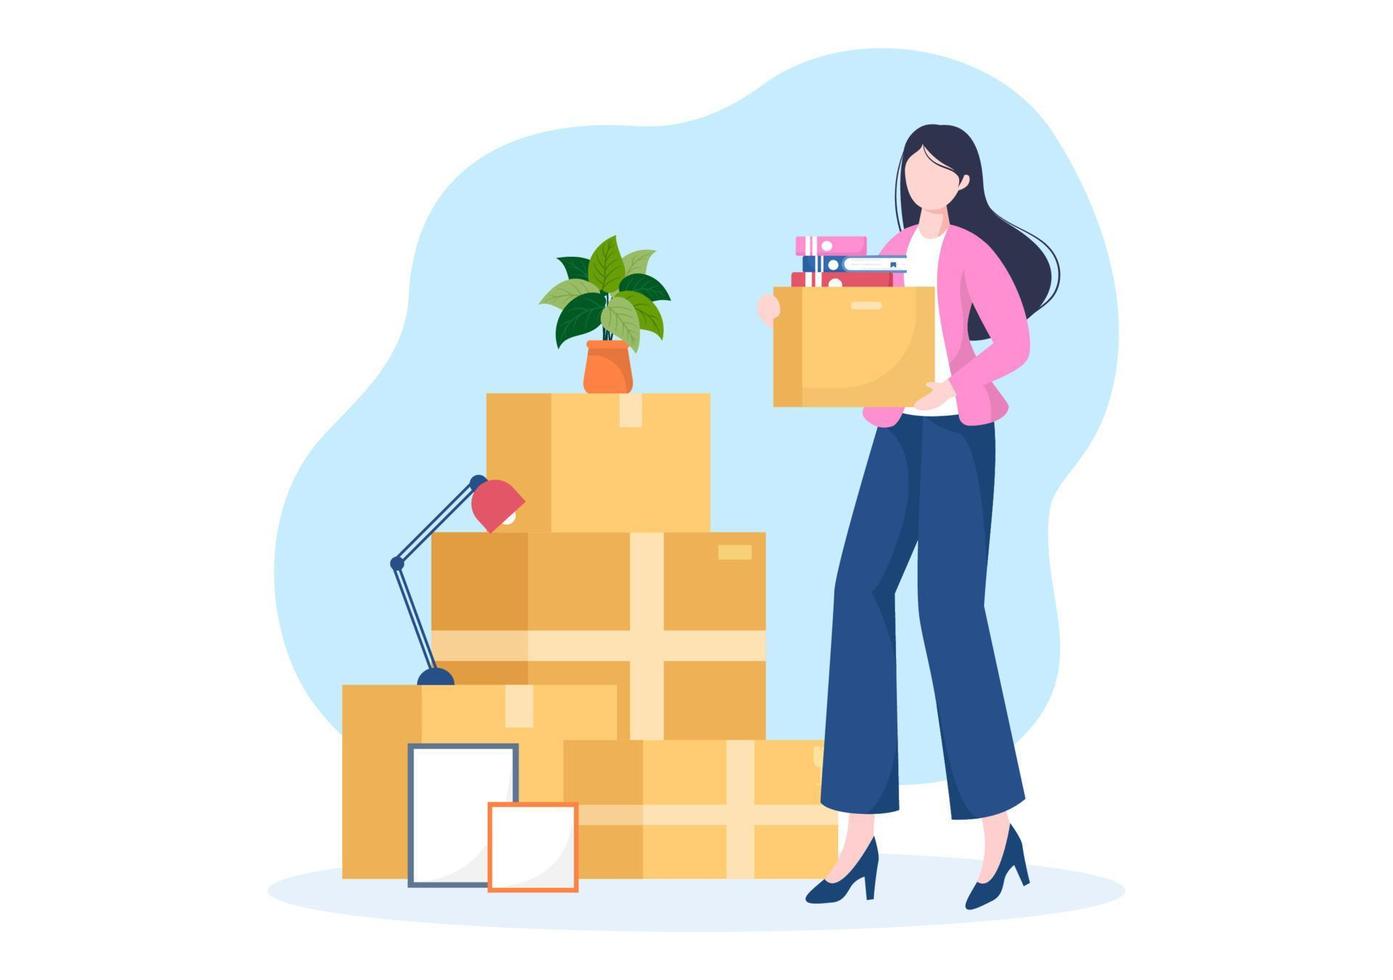 Home Relocation or People Moving with Cardboard Packaging Boxes or Pack Belongings Move to New Ones in Flat Cartoon Illustration vector